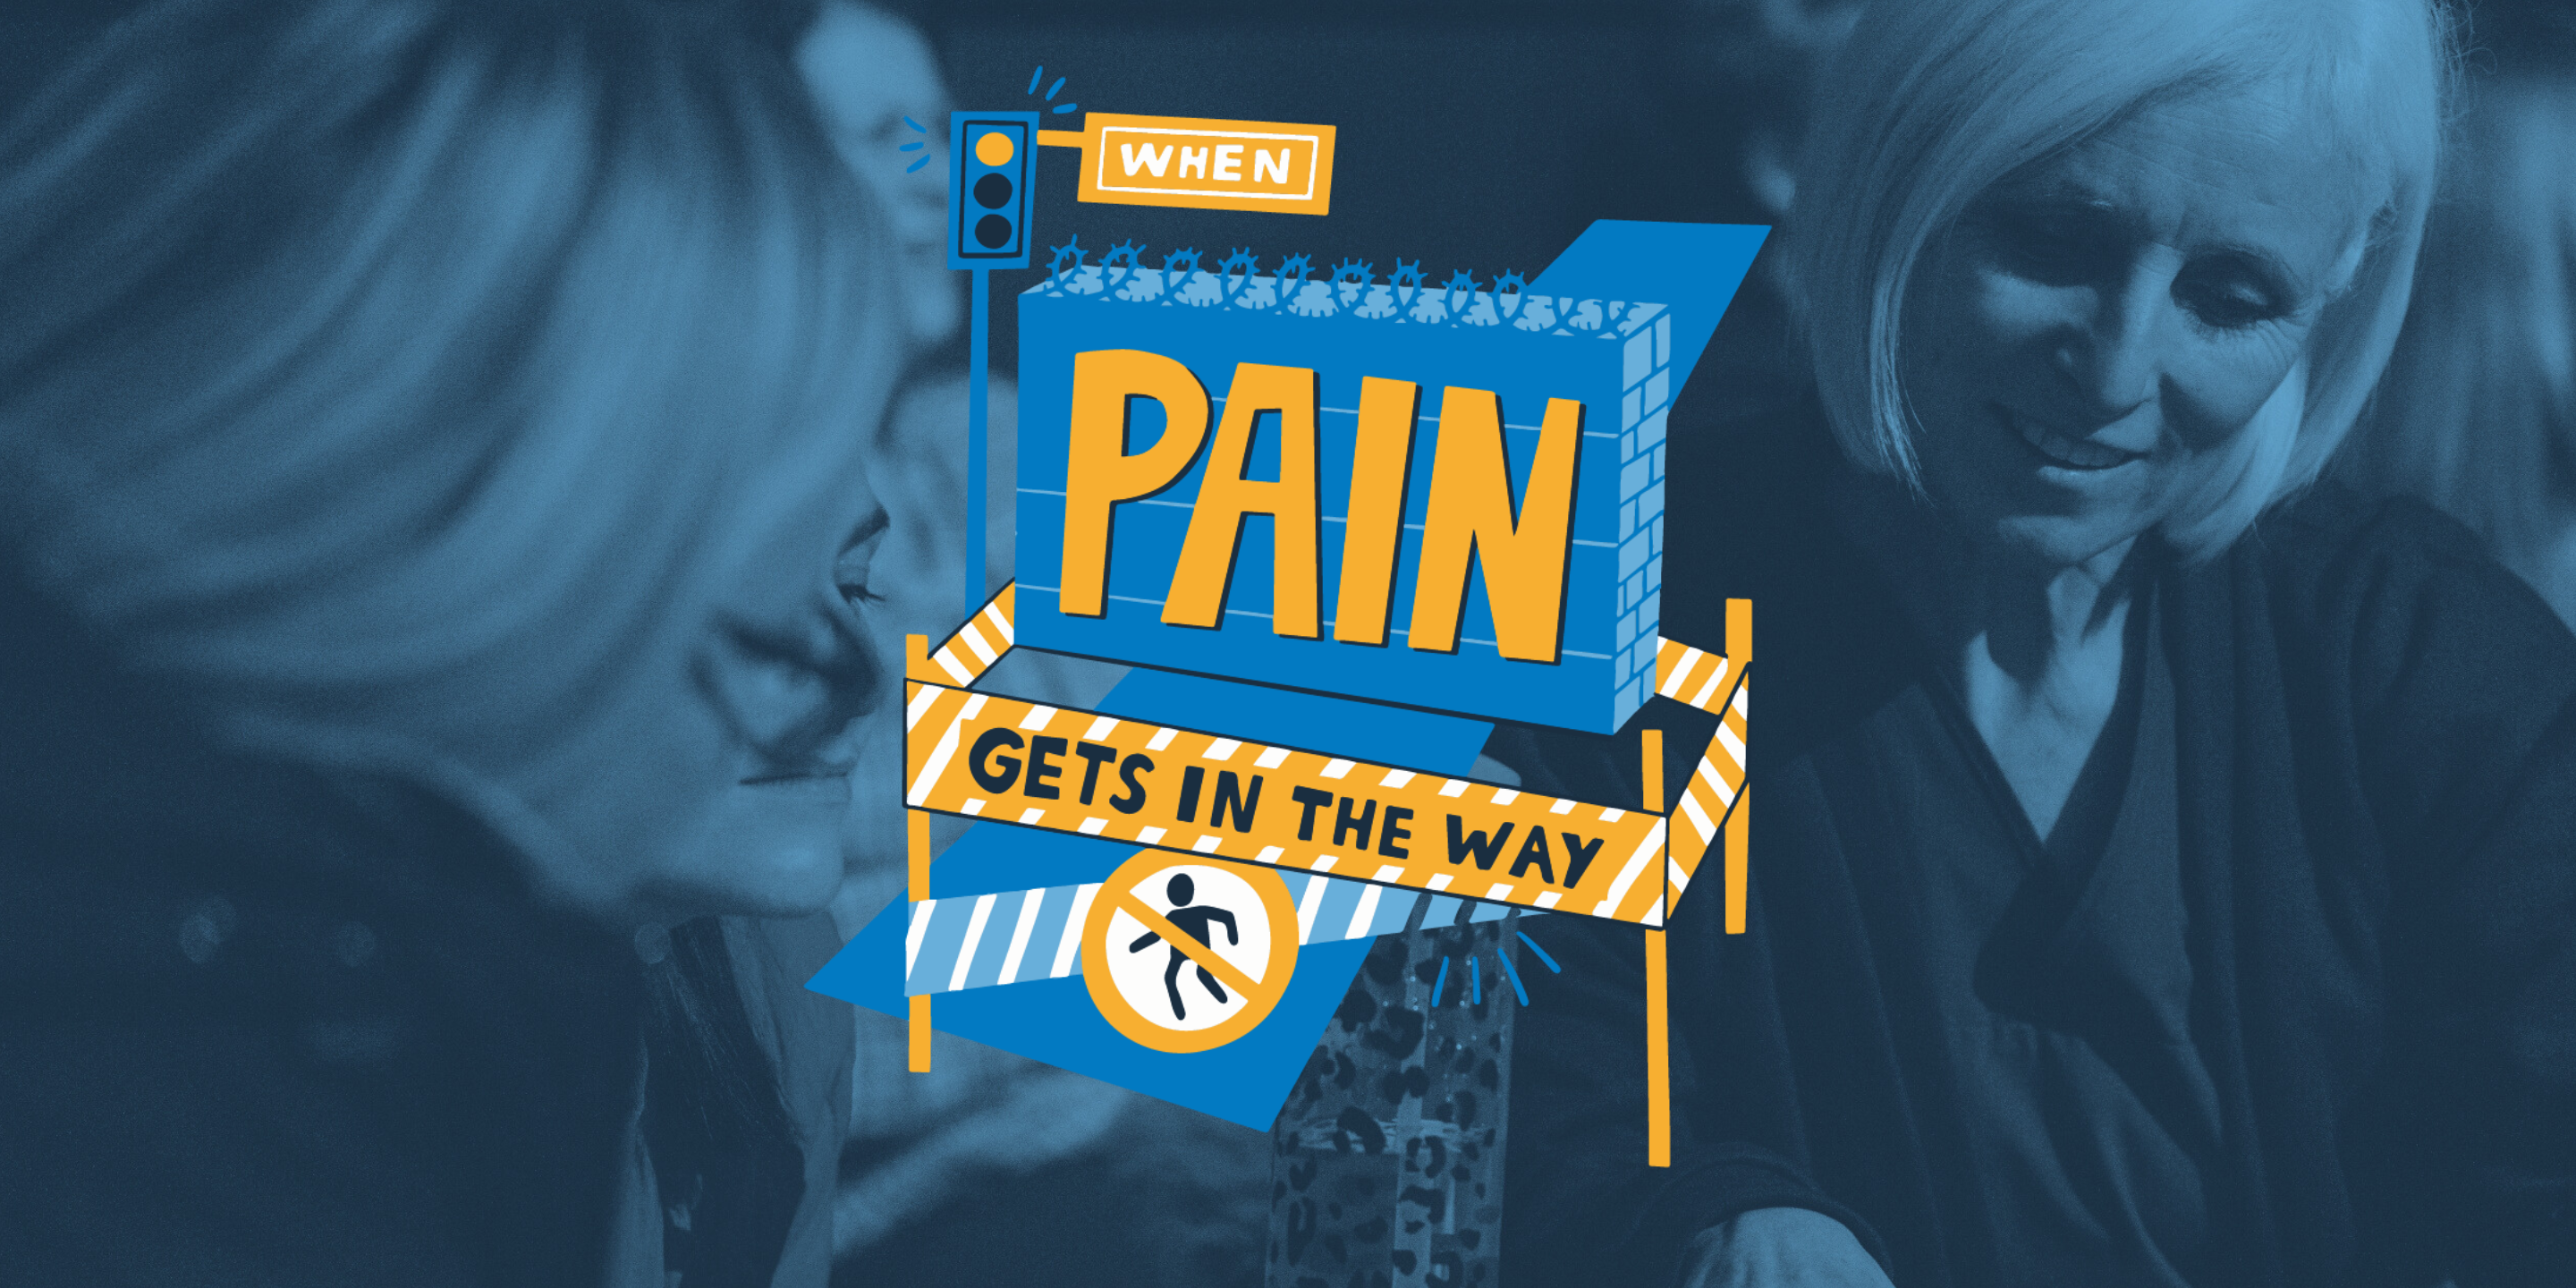 An image of a healthcare professional enjoying an event, alongside the logo for 'When Pain Gets in the Way'